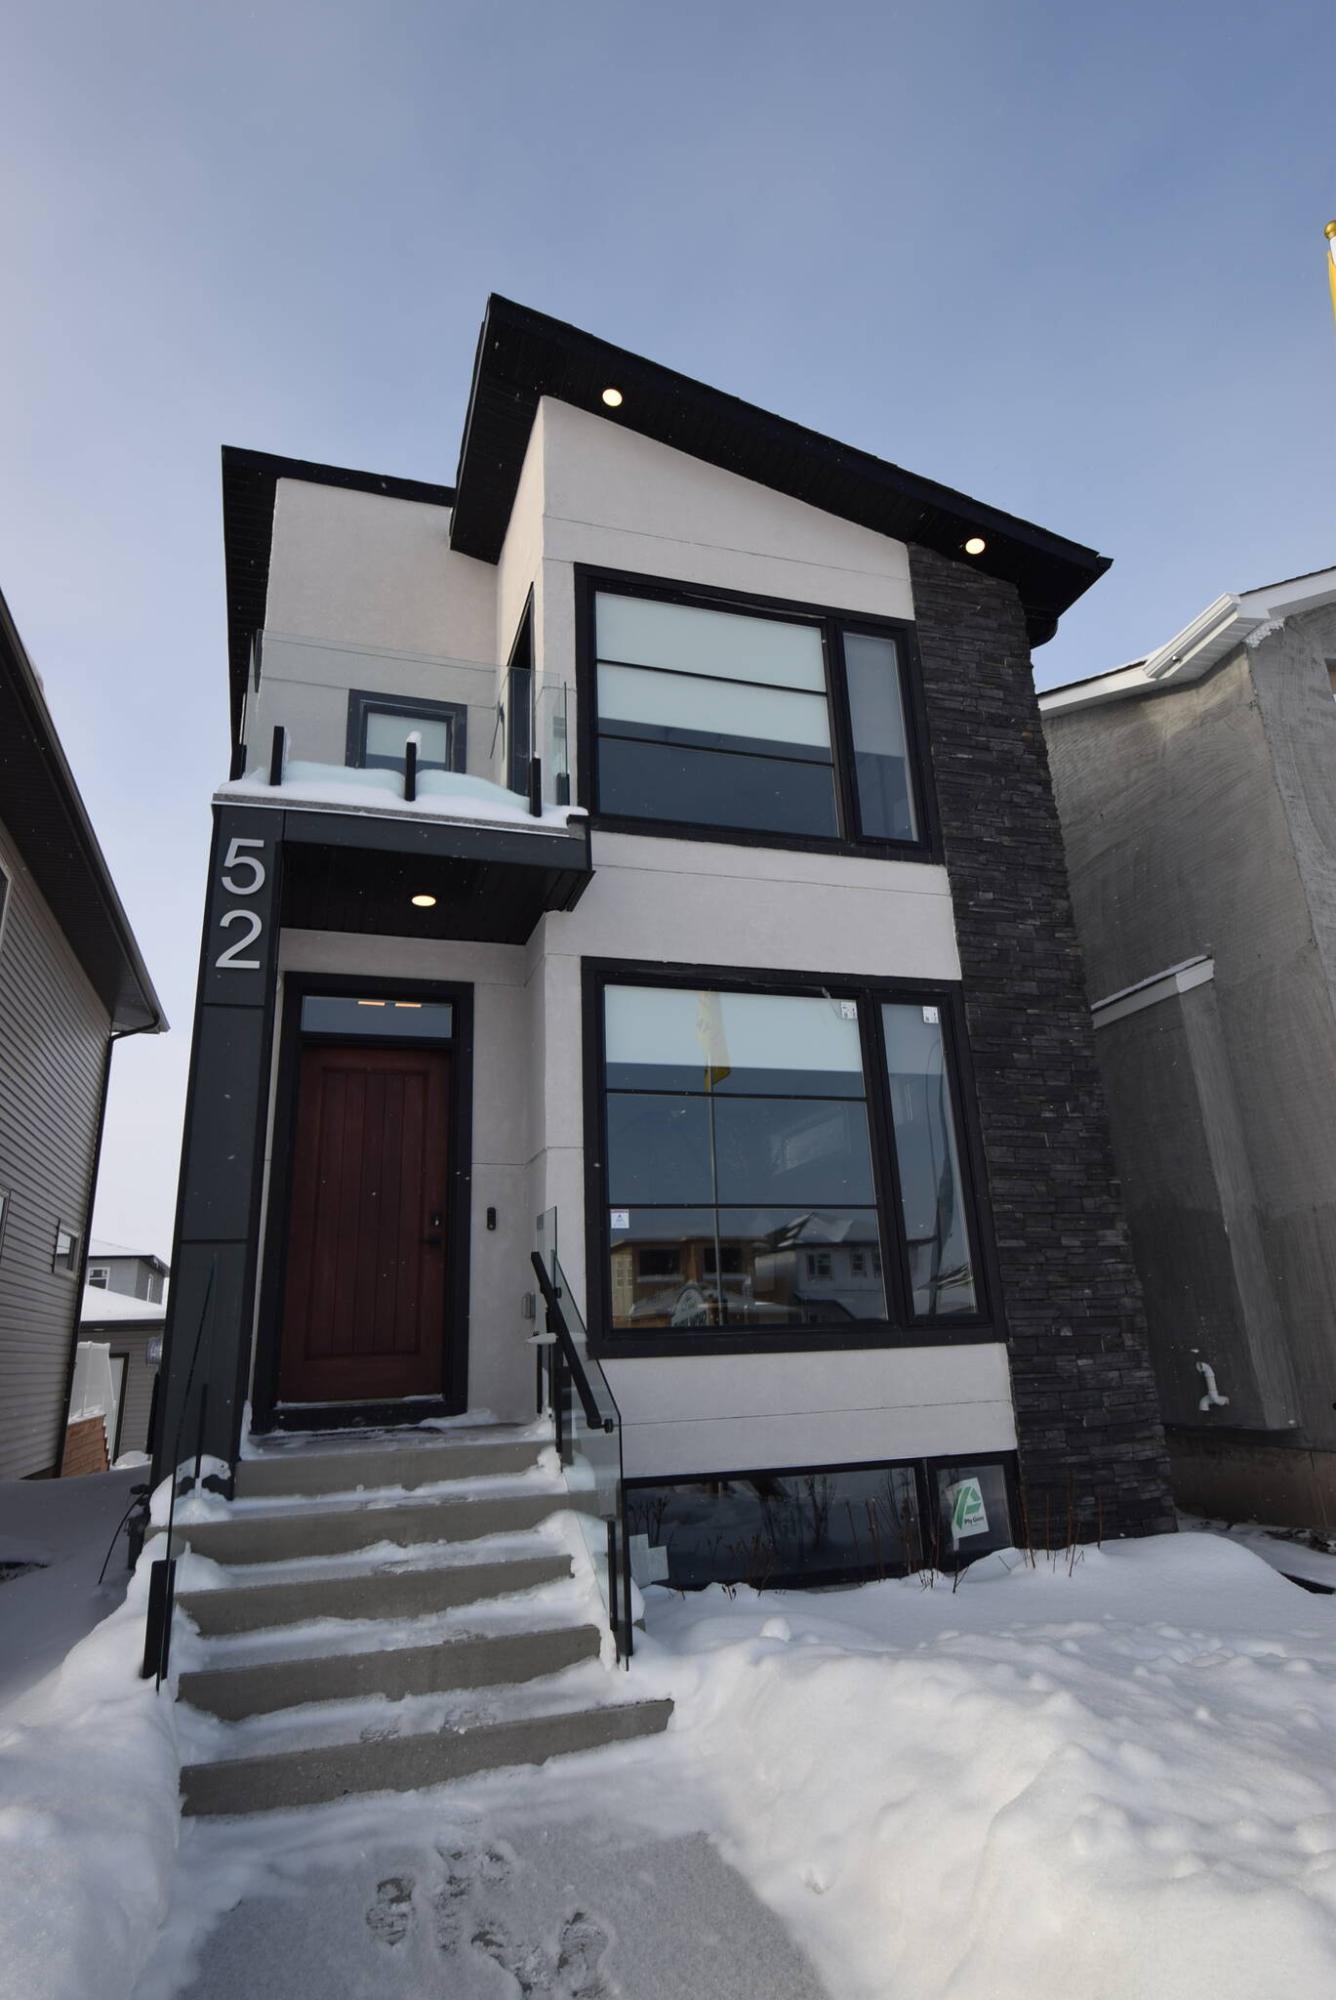  <p>Photos by Todd Lewys / Winnipeg Free Press</p>
                                <p>A creative yet practical design, the Bellmond plan by Discovery Homes offers a perfect synergy of livability, style and value.</p> 